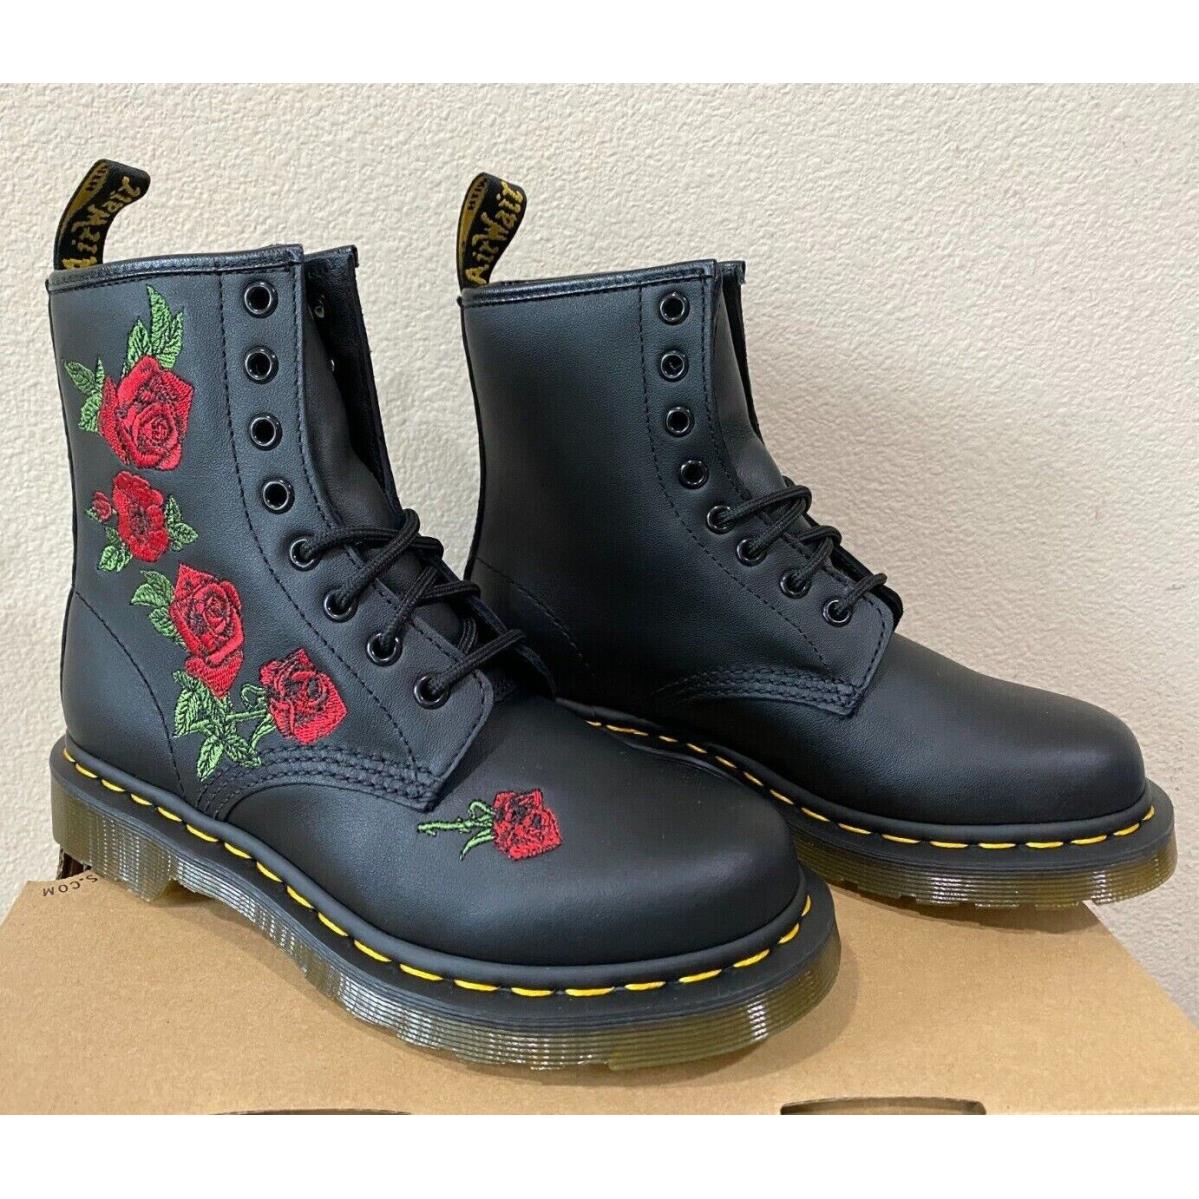 Dr. Martens 1460 Vonda Floral Embroidered 8 Eye Women`s Boots Black/Red Roses